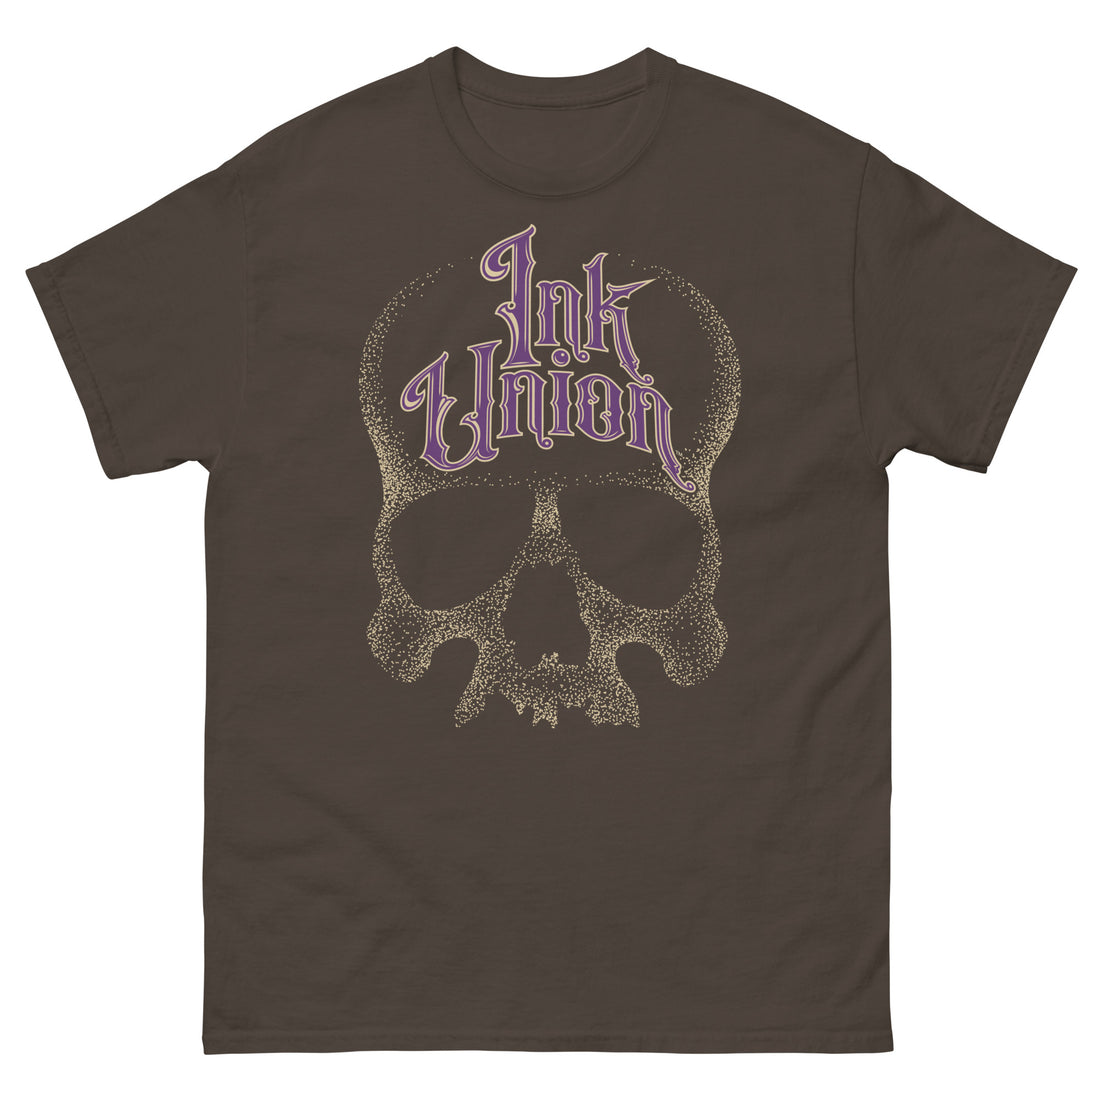 A dark chocolate t-shirt adorned with a gold dot work human skull  and the words Ink Union in fancy gold and purple lettering across the forehead of the skull.